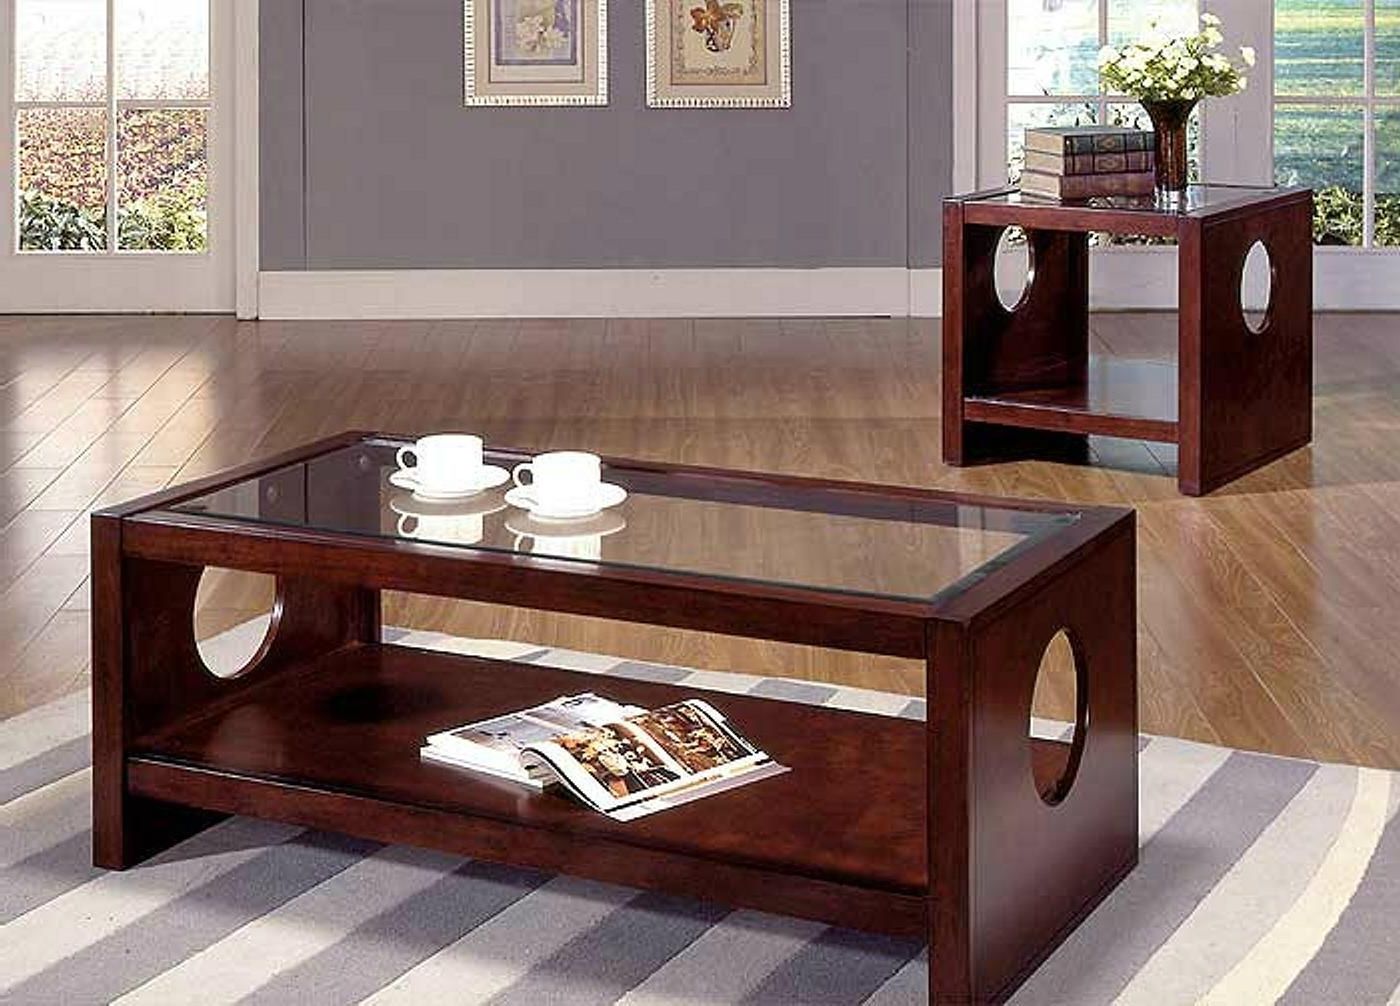 2pcs Wooden Mahogany Hollow Core Panel Glass Top Coffee In Fashionable Espresso Wood And Glass Top Coffee Tables (Gallery 5 of 20)